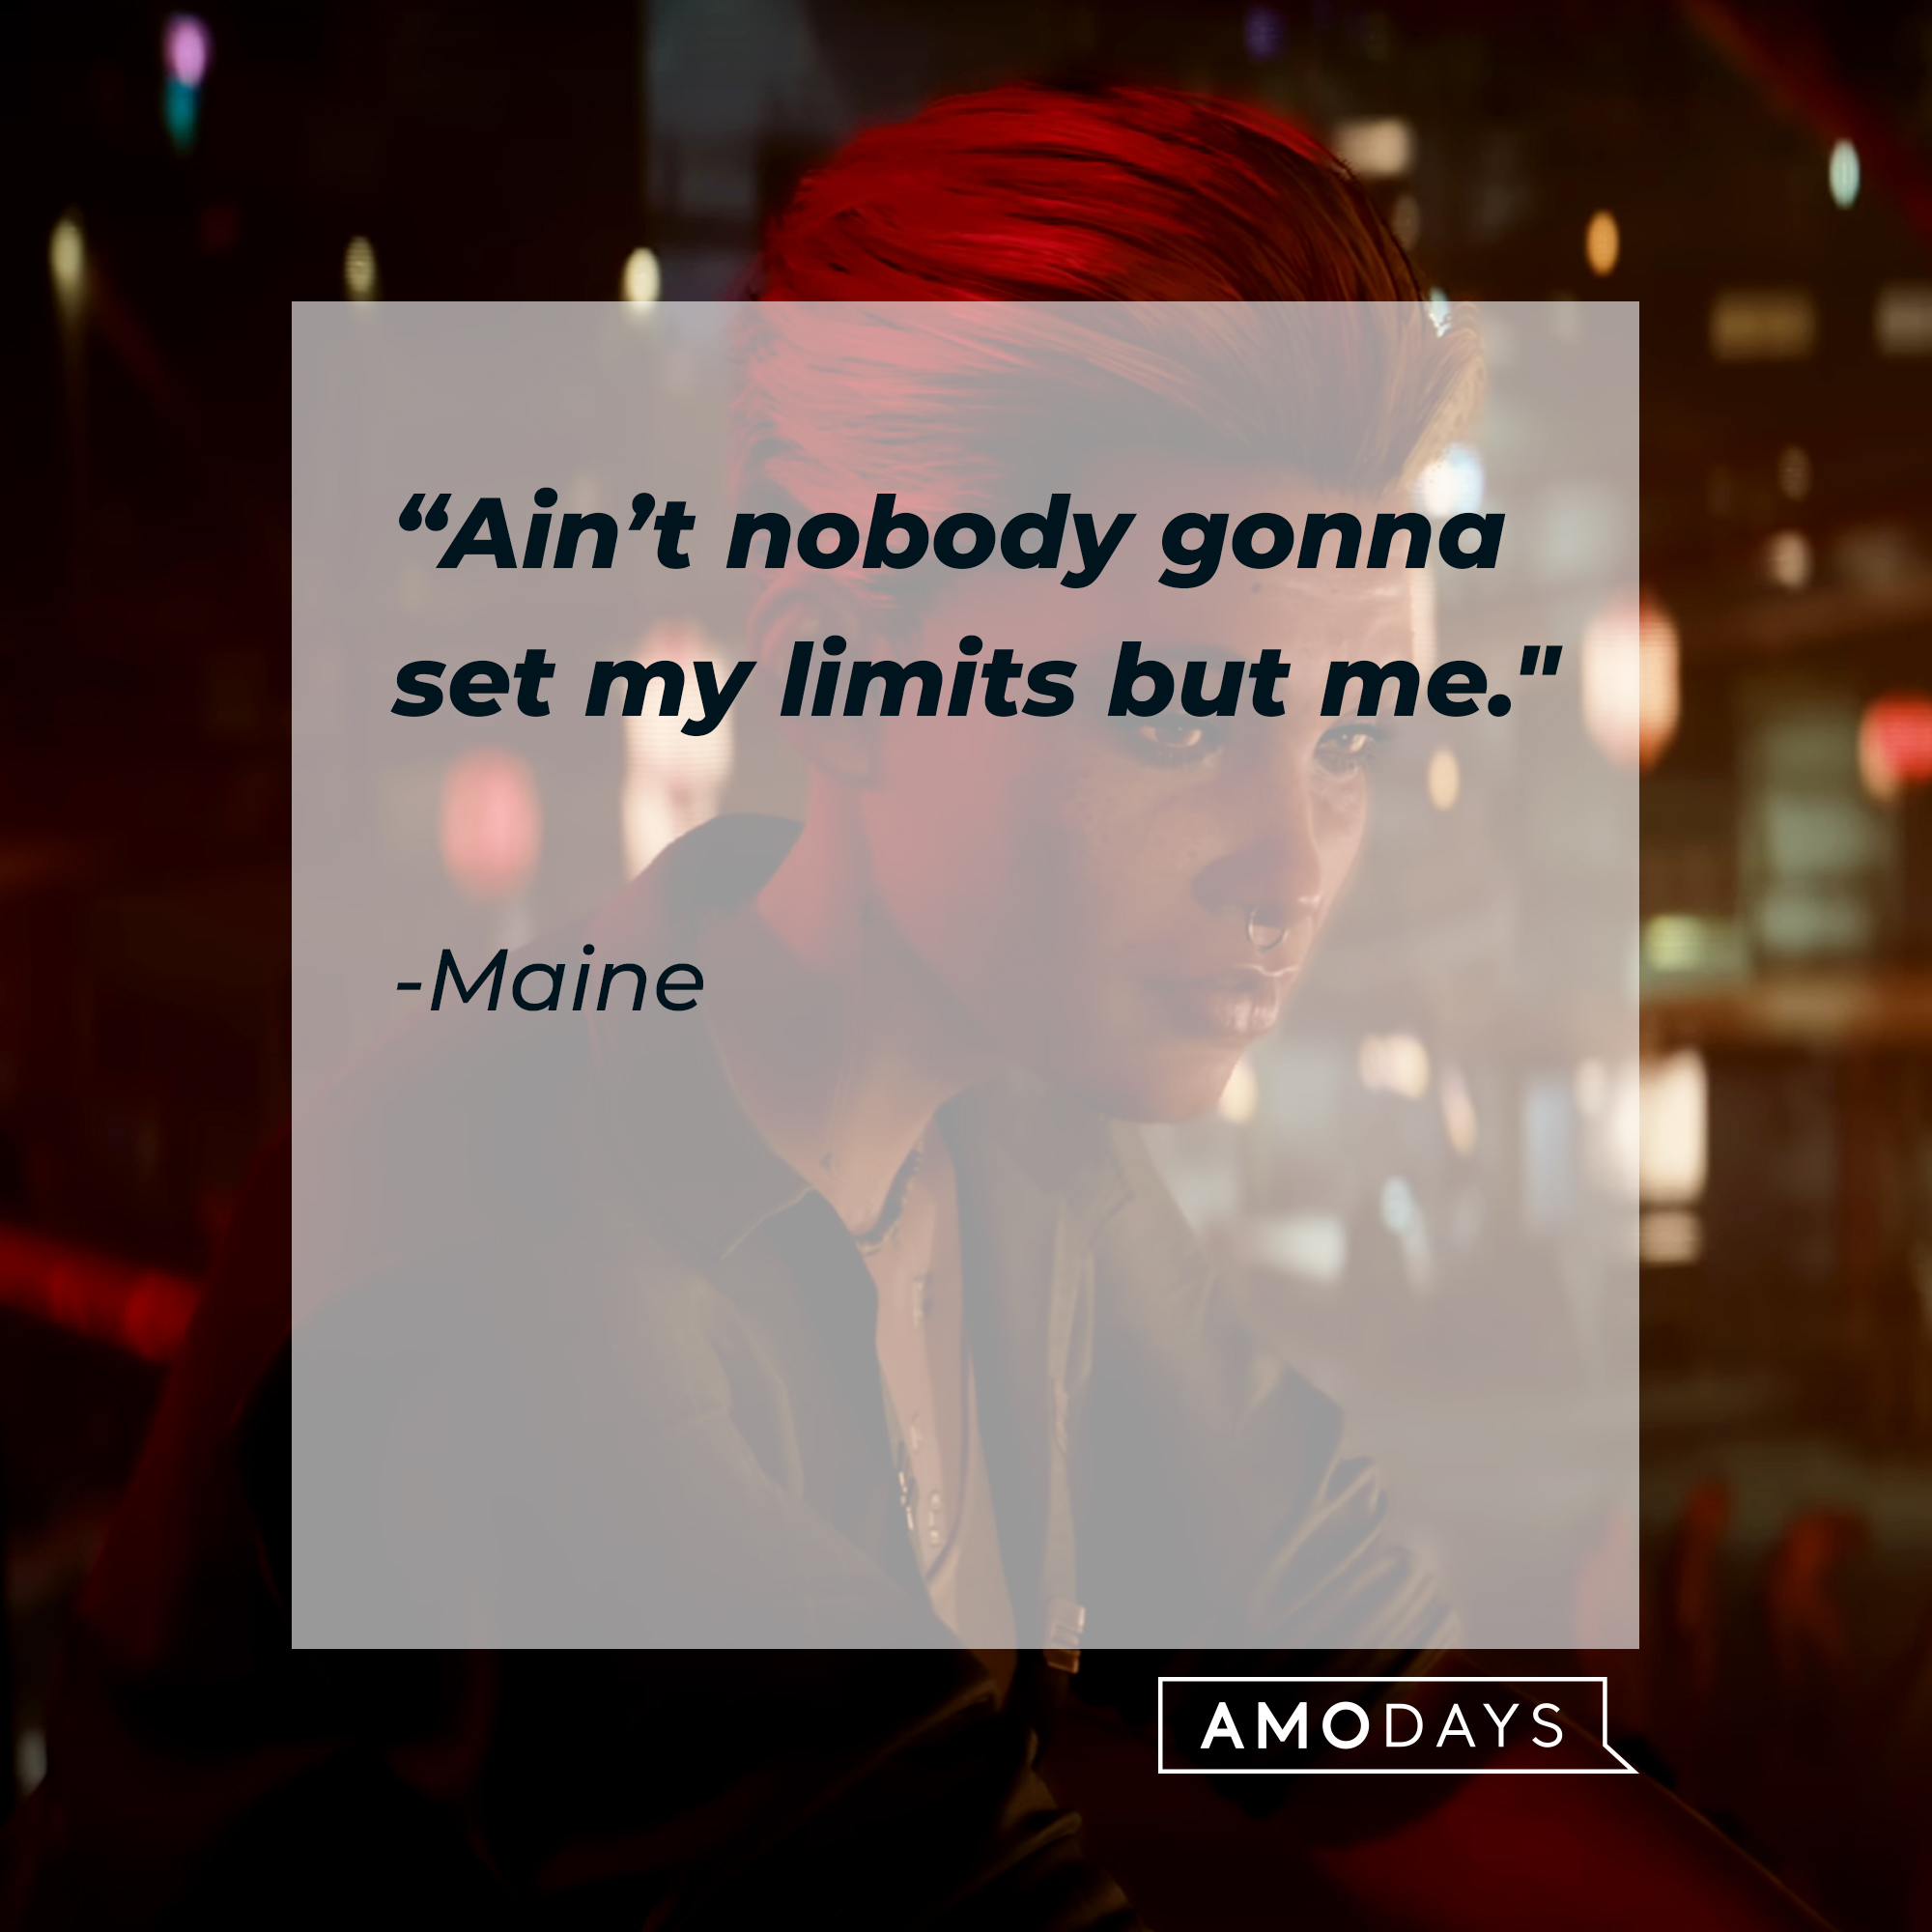 Maine’s quote: "Ain’t nobody gonna set my limits but me." | Source: Youtube.com/CyberpunkGame